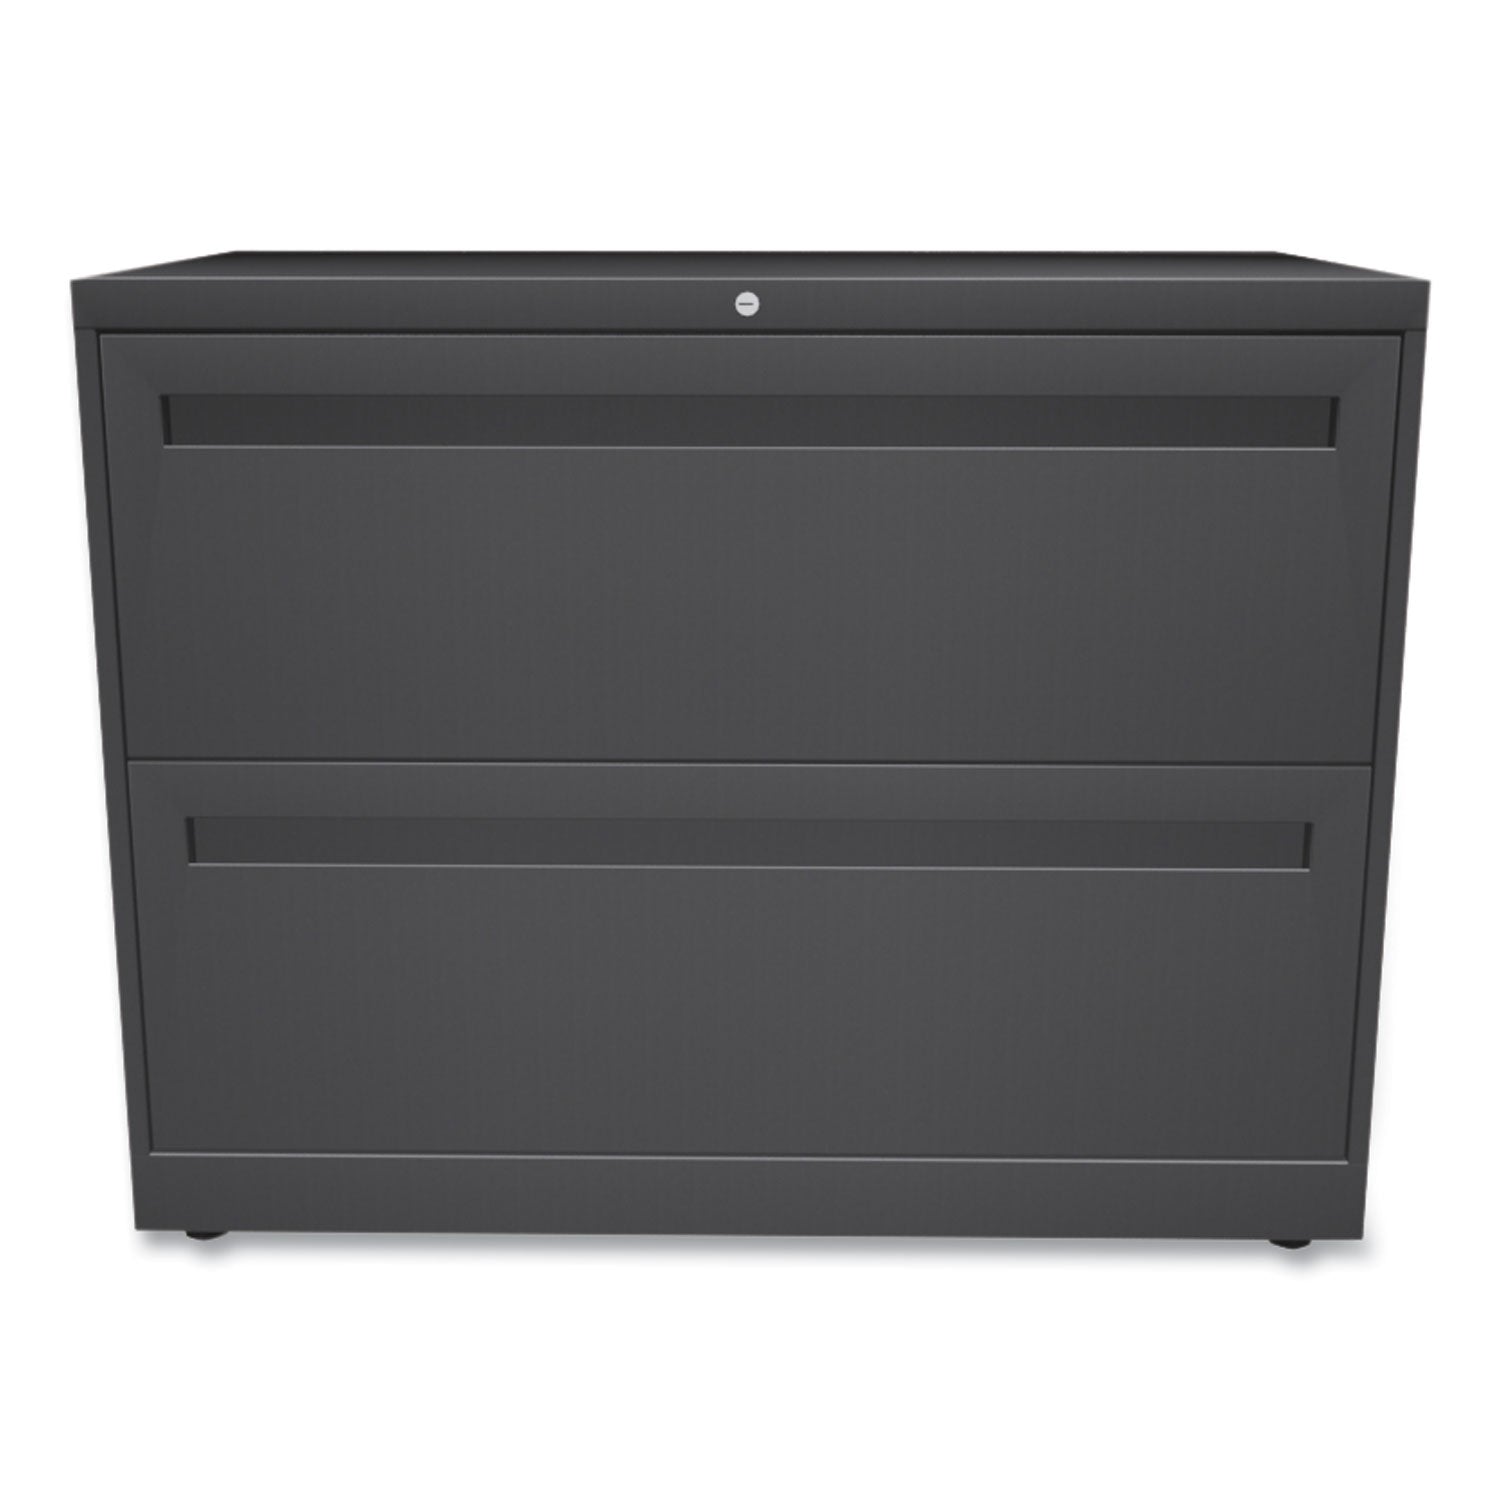 Brigade 700 Series Lateral File, 2 Legal/Letter-Size File Drawers, Charcoal, 36" x 18" x 28 - 